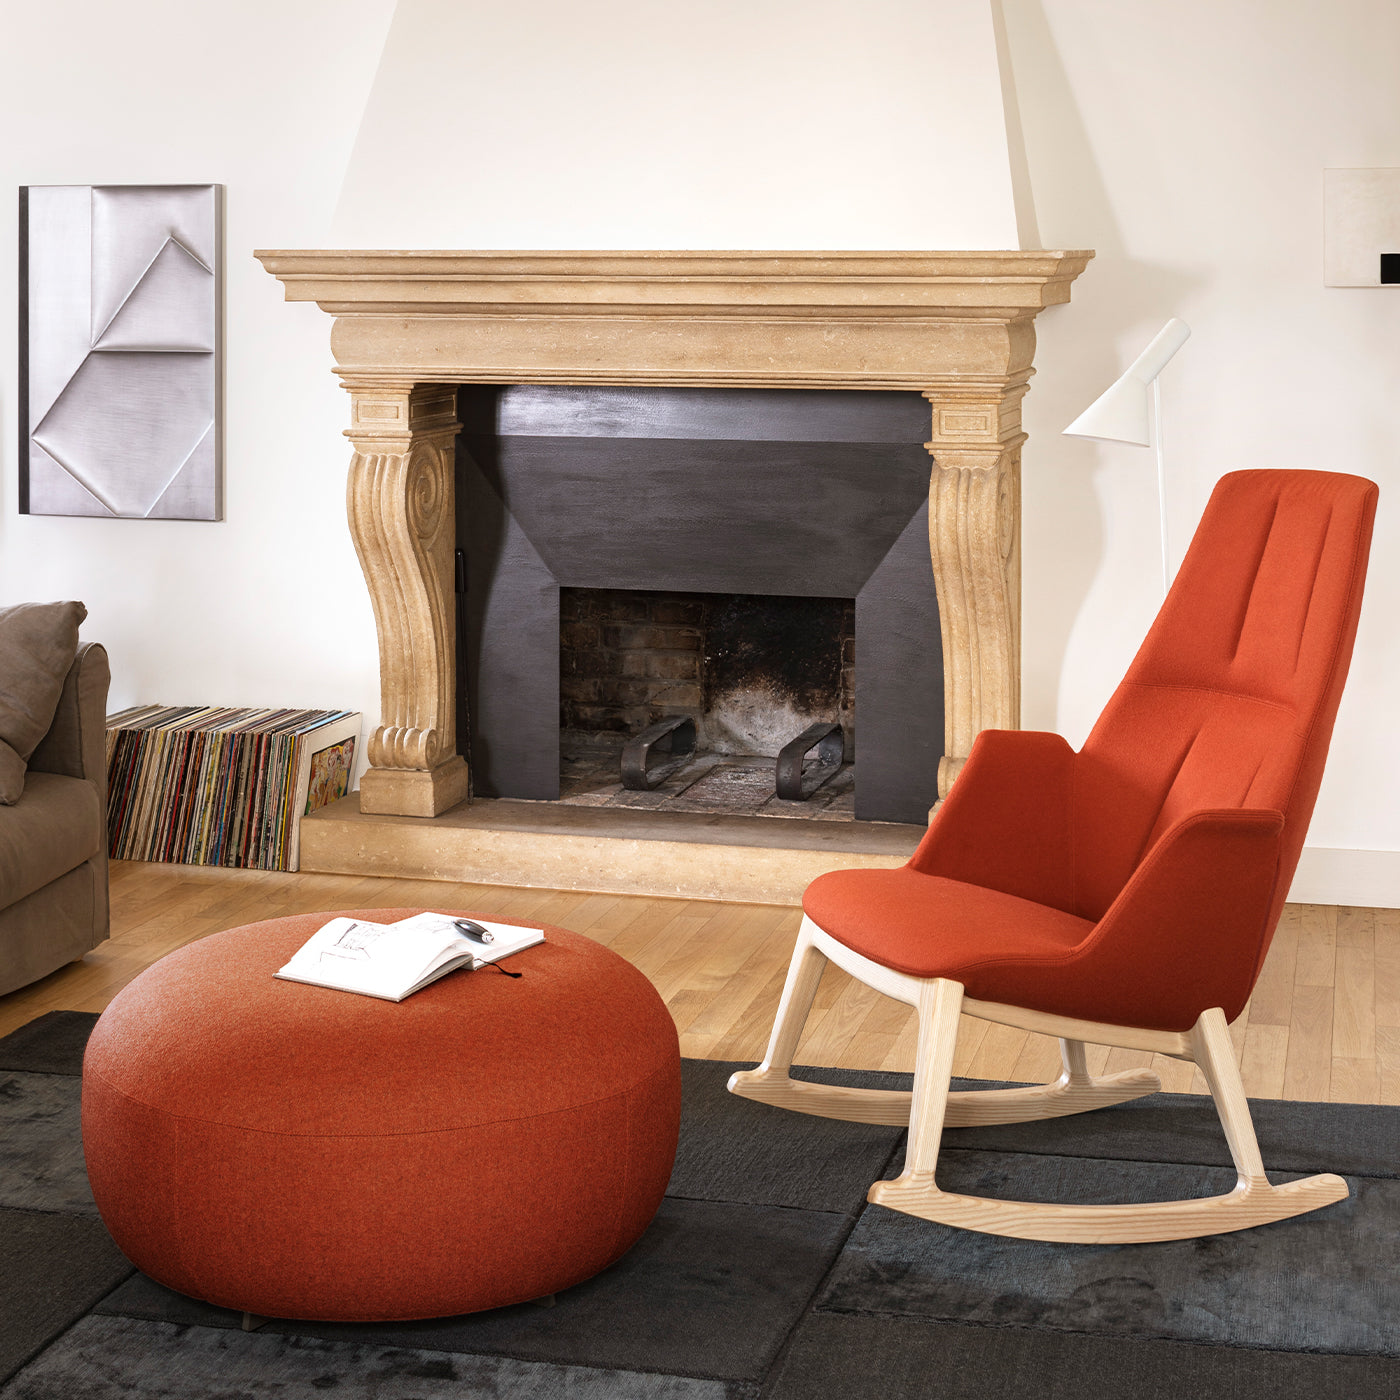 Hive Red Armchair by Camira - Alternative view 4